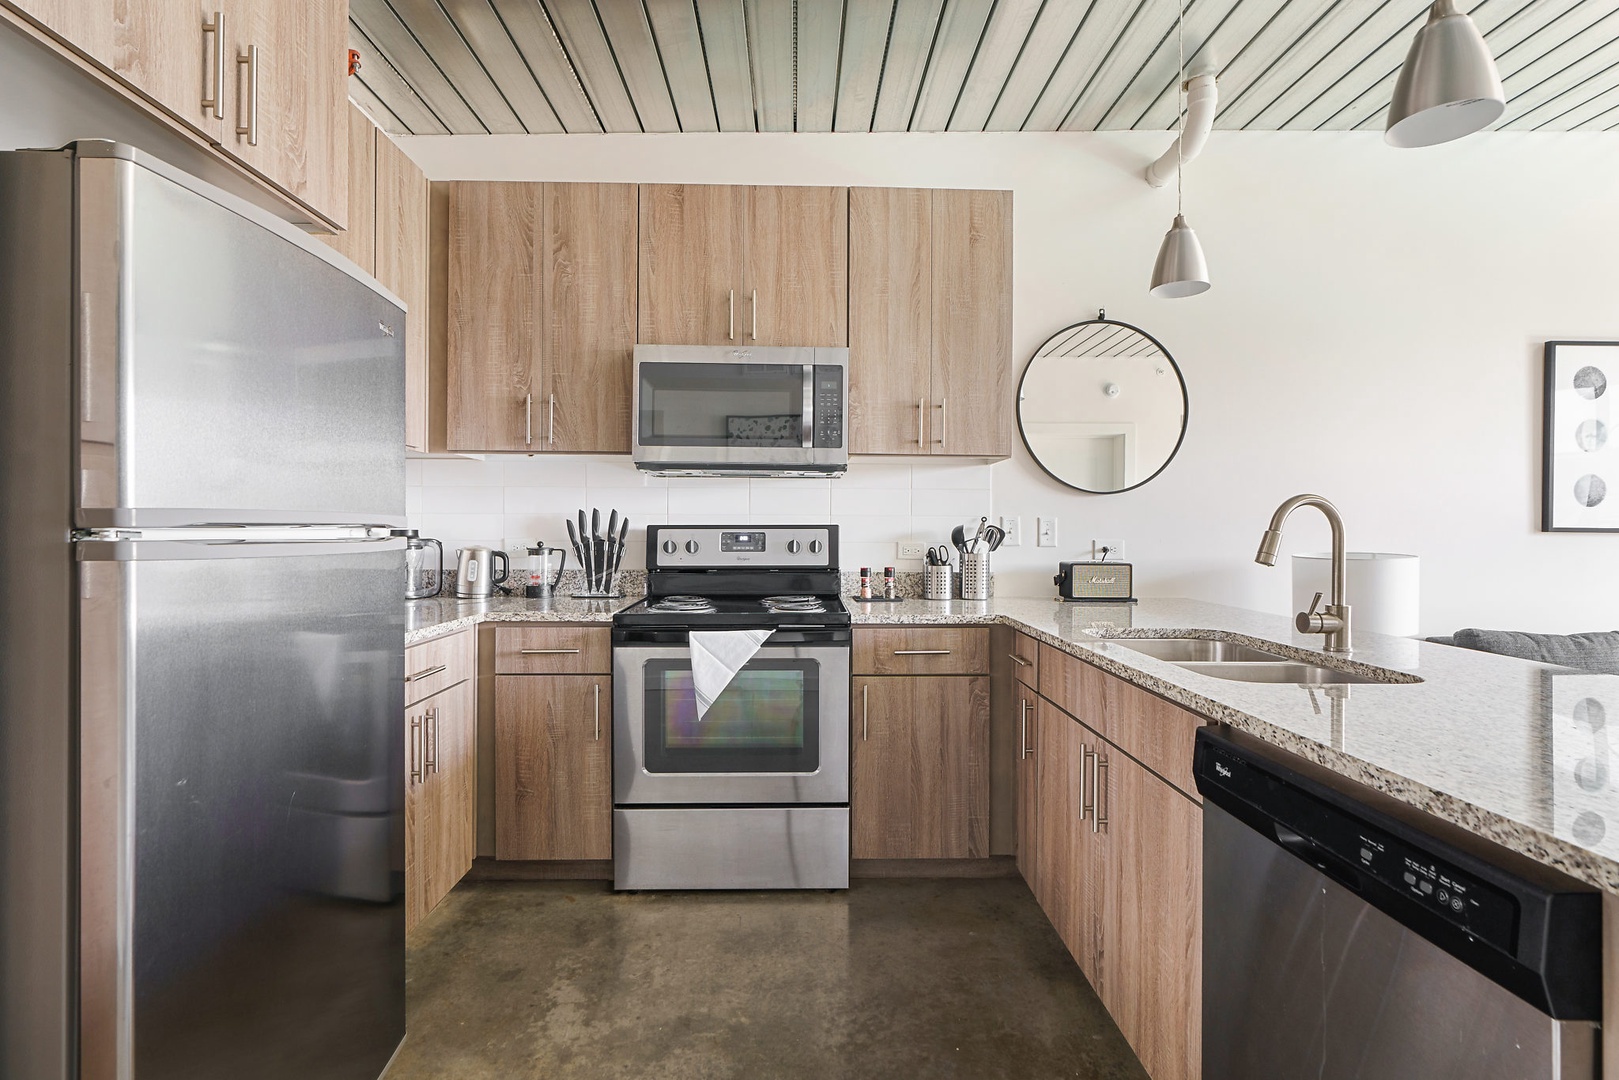 Prepare delicious meals in this modern kitchen with all the essentials.